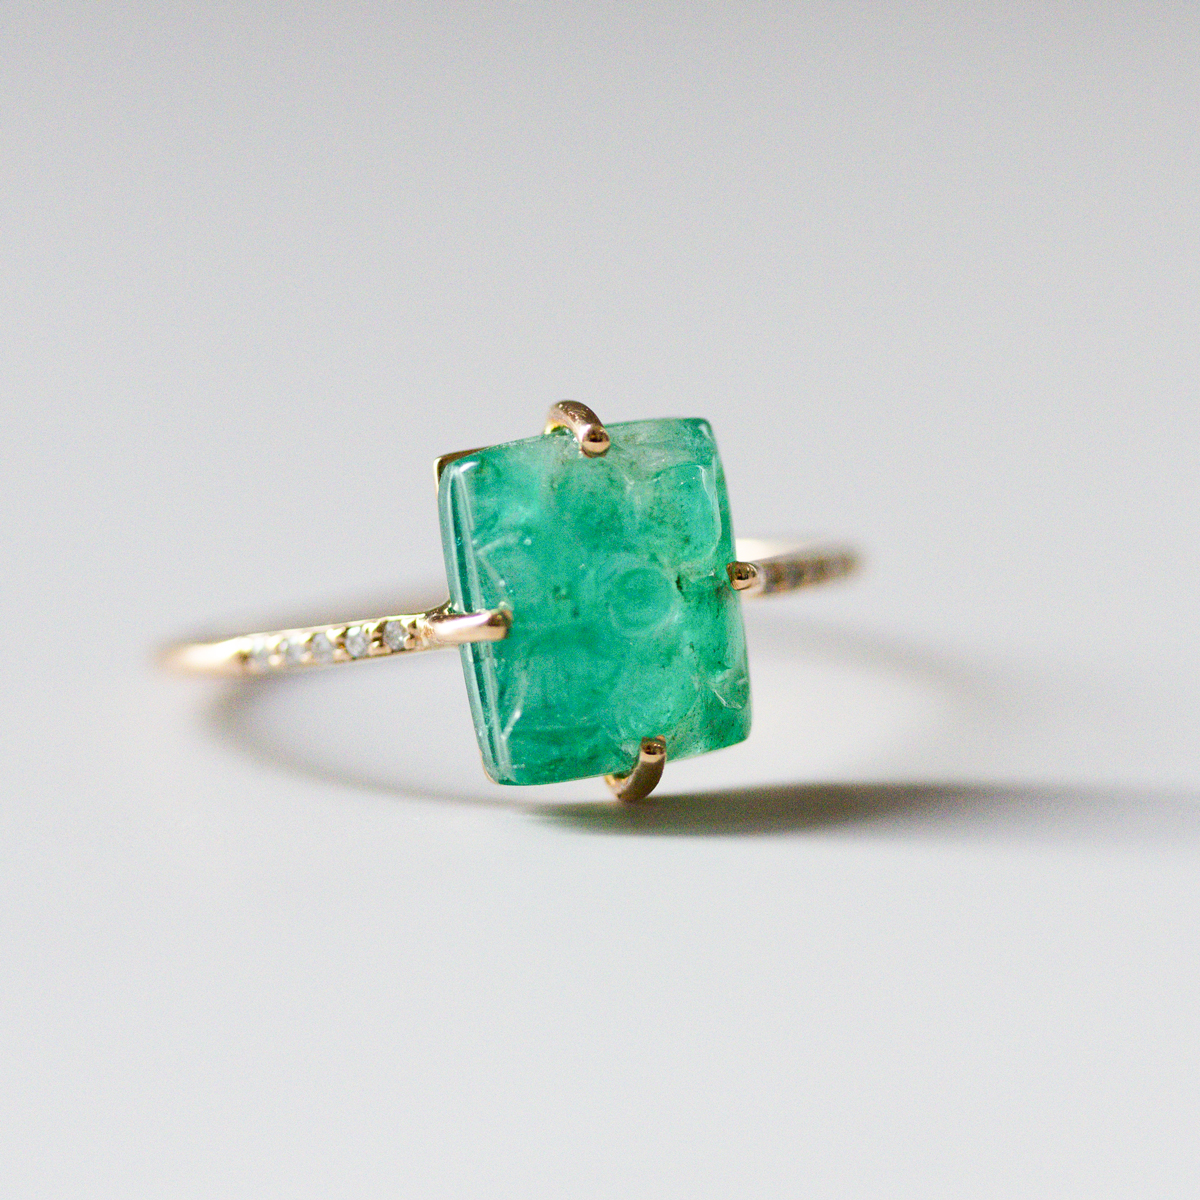 Carved Natural Emerald Fashion Ring with Diamond, 14k Yellow Gold